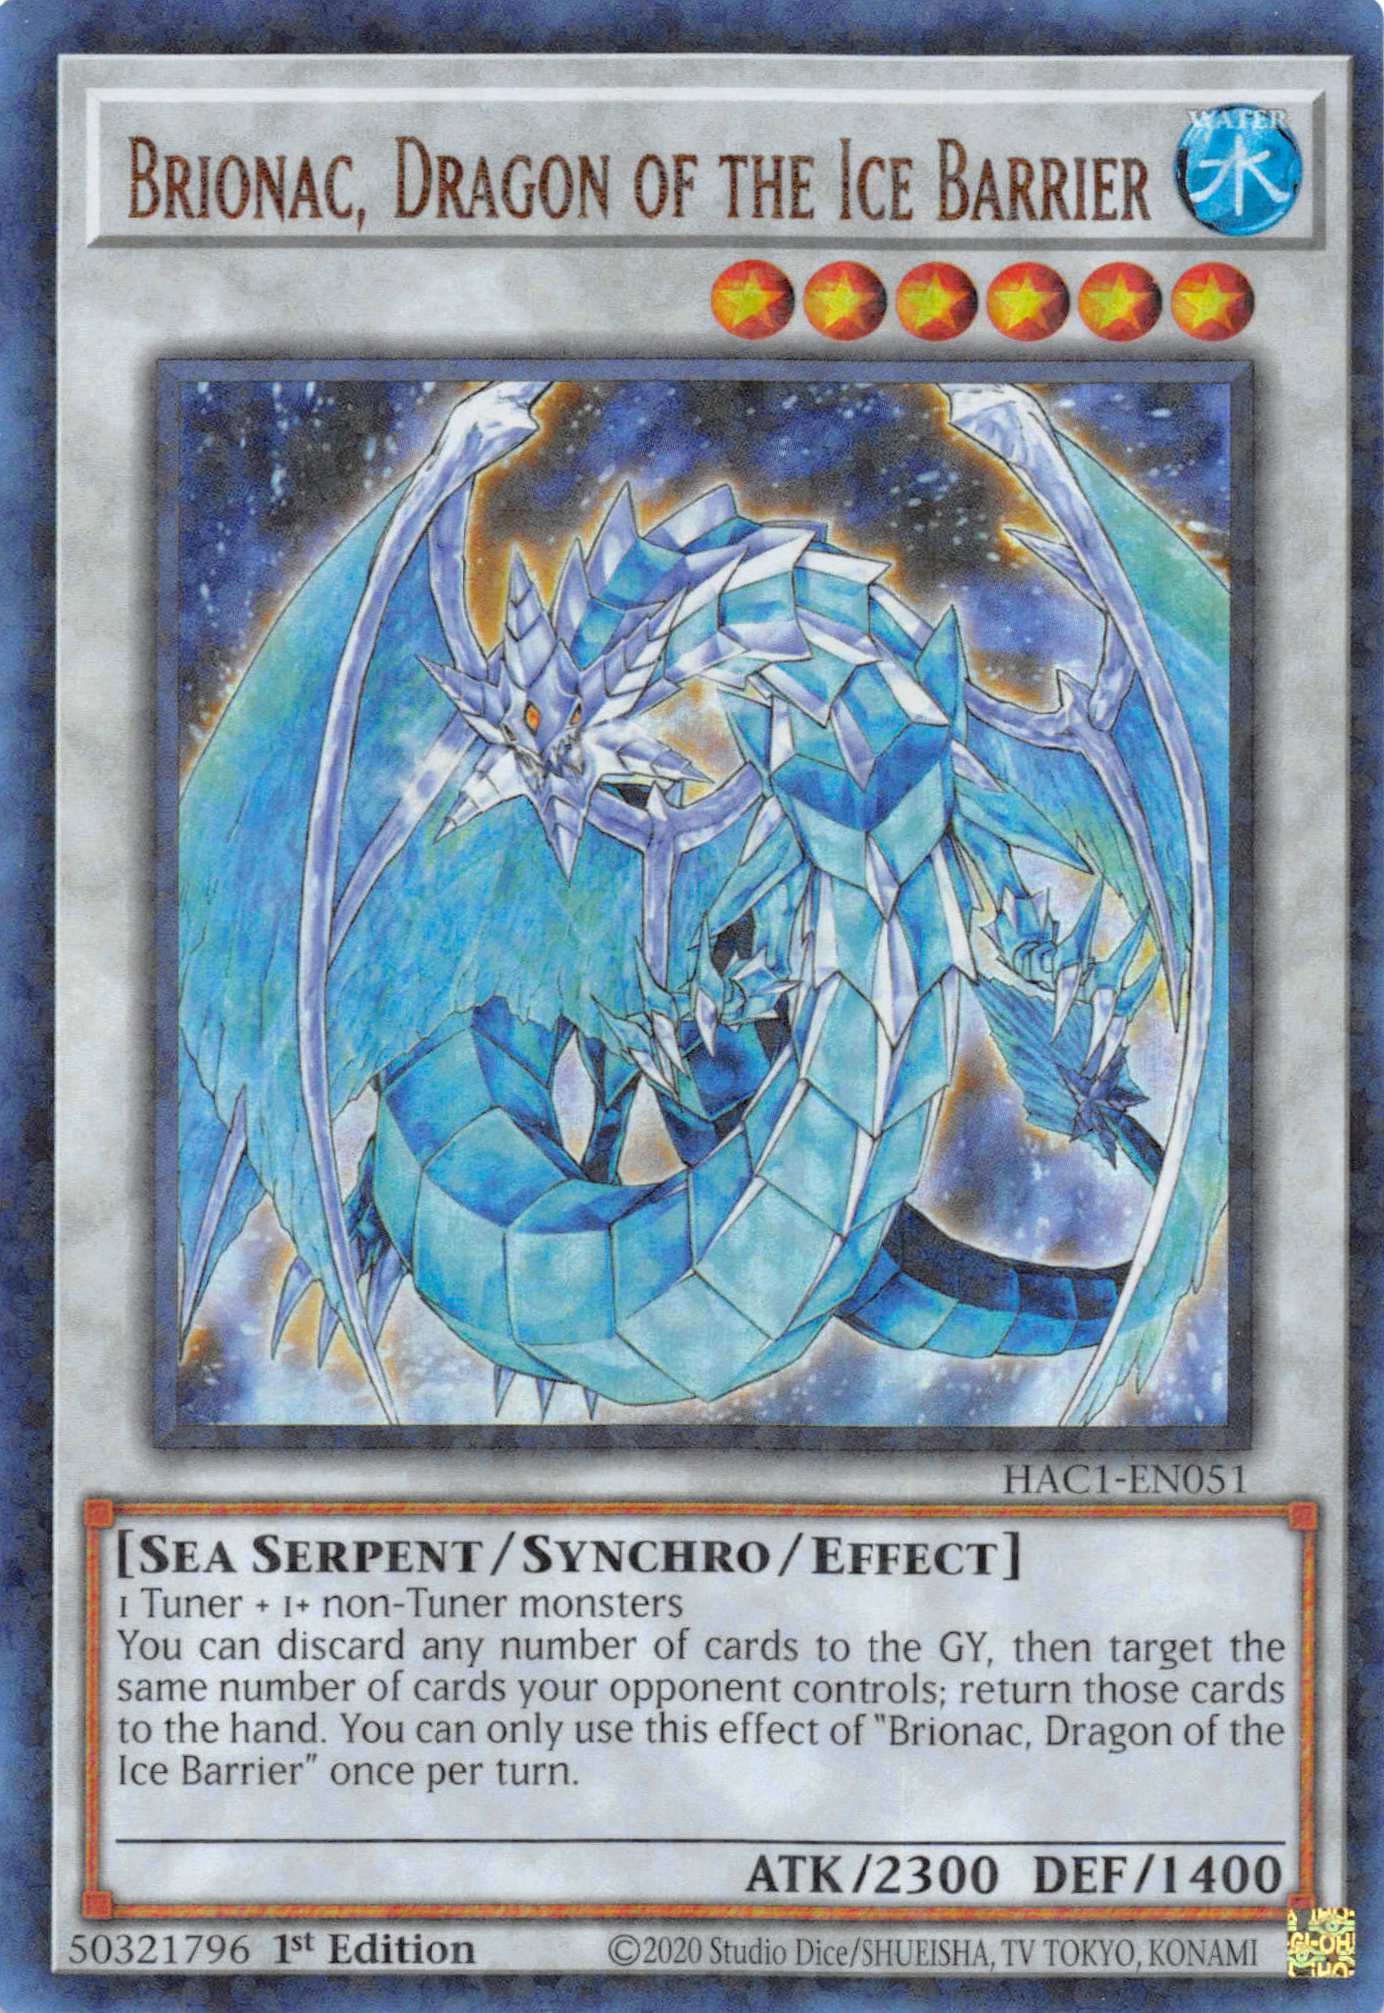 Brionac, Dragon of the Ice Barrier (Duel Terminal) [HAC1-EN051] Parallel Rare | Total Play